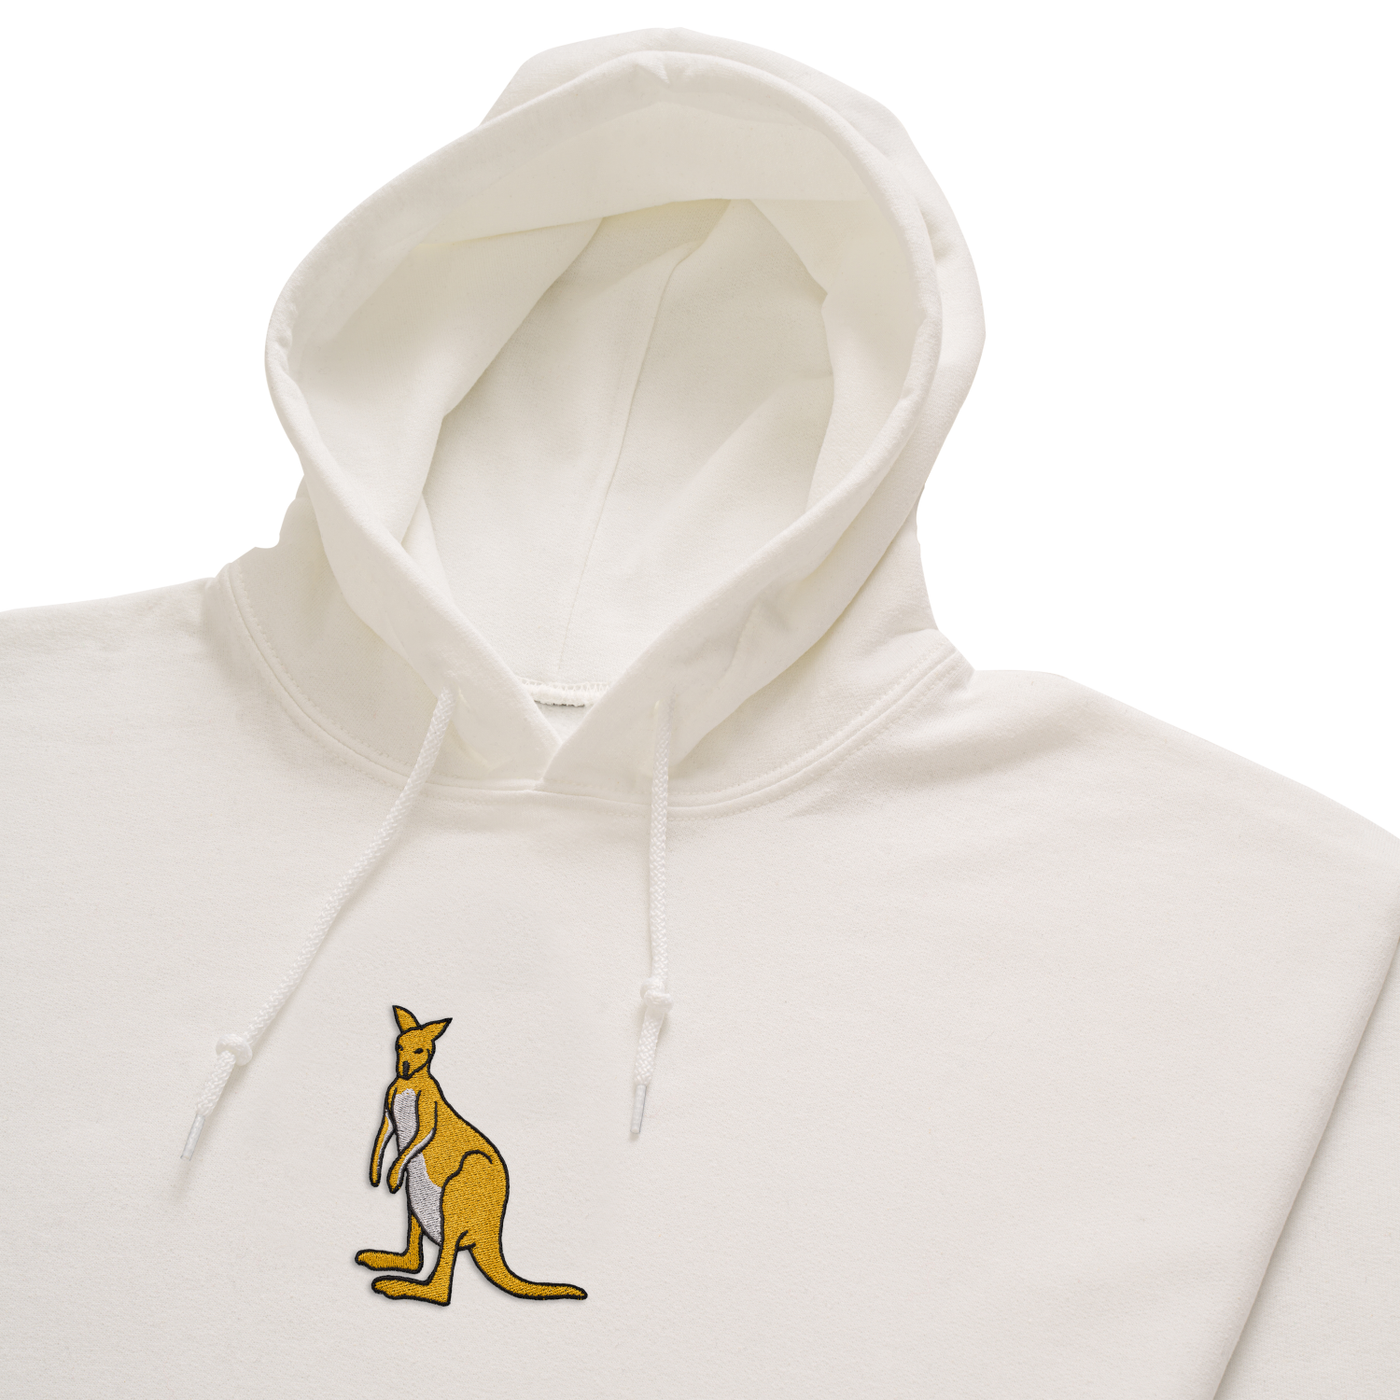 Bobby's Planet Women's Embroidered Kangaroo Hoodie from Australia Down Under Animals Collection in White Color#color_white